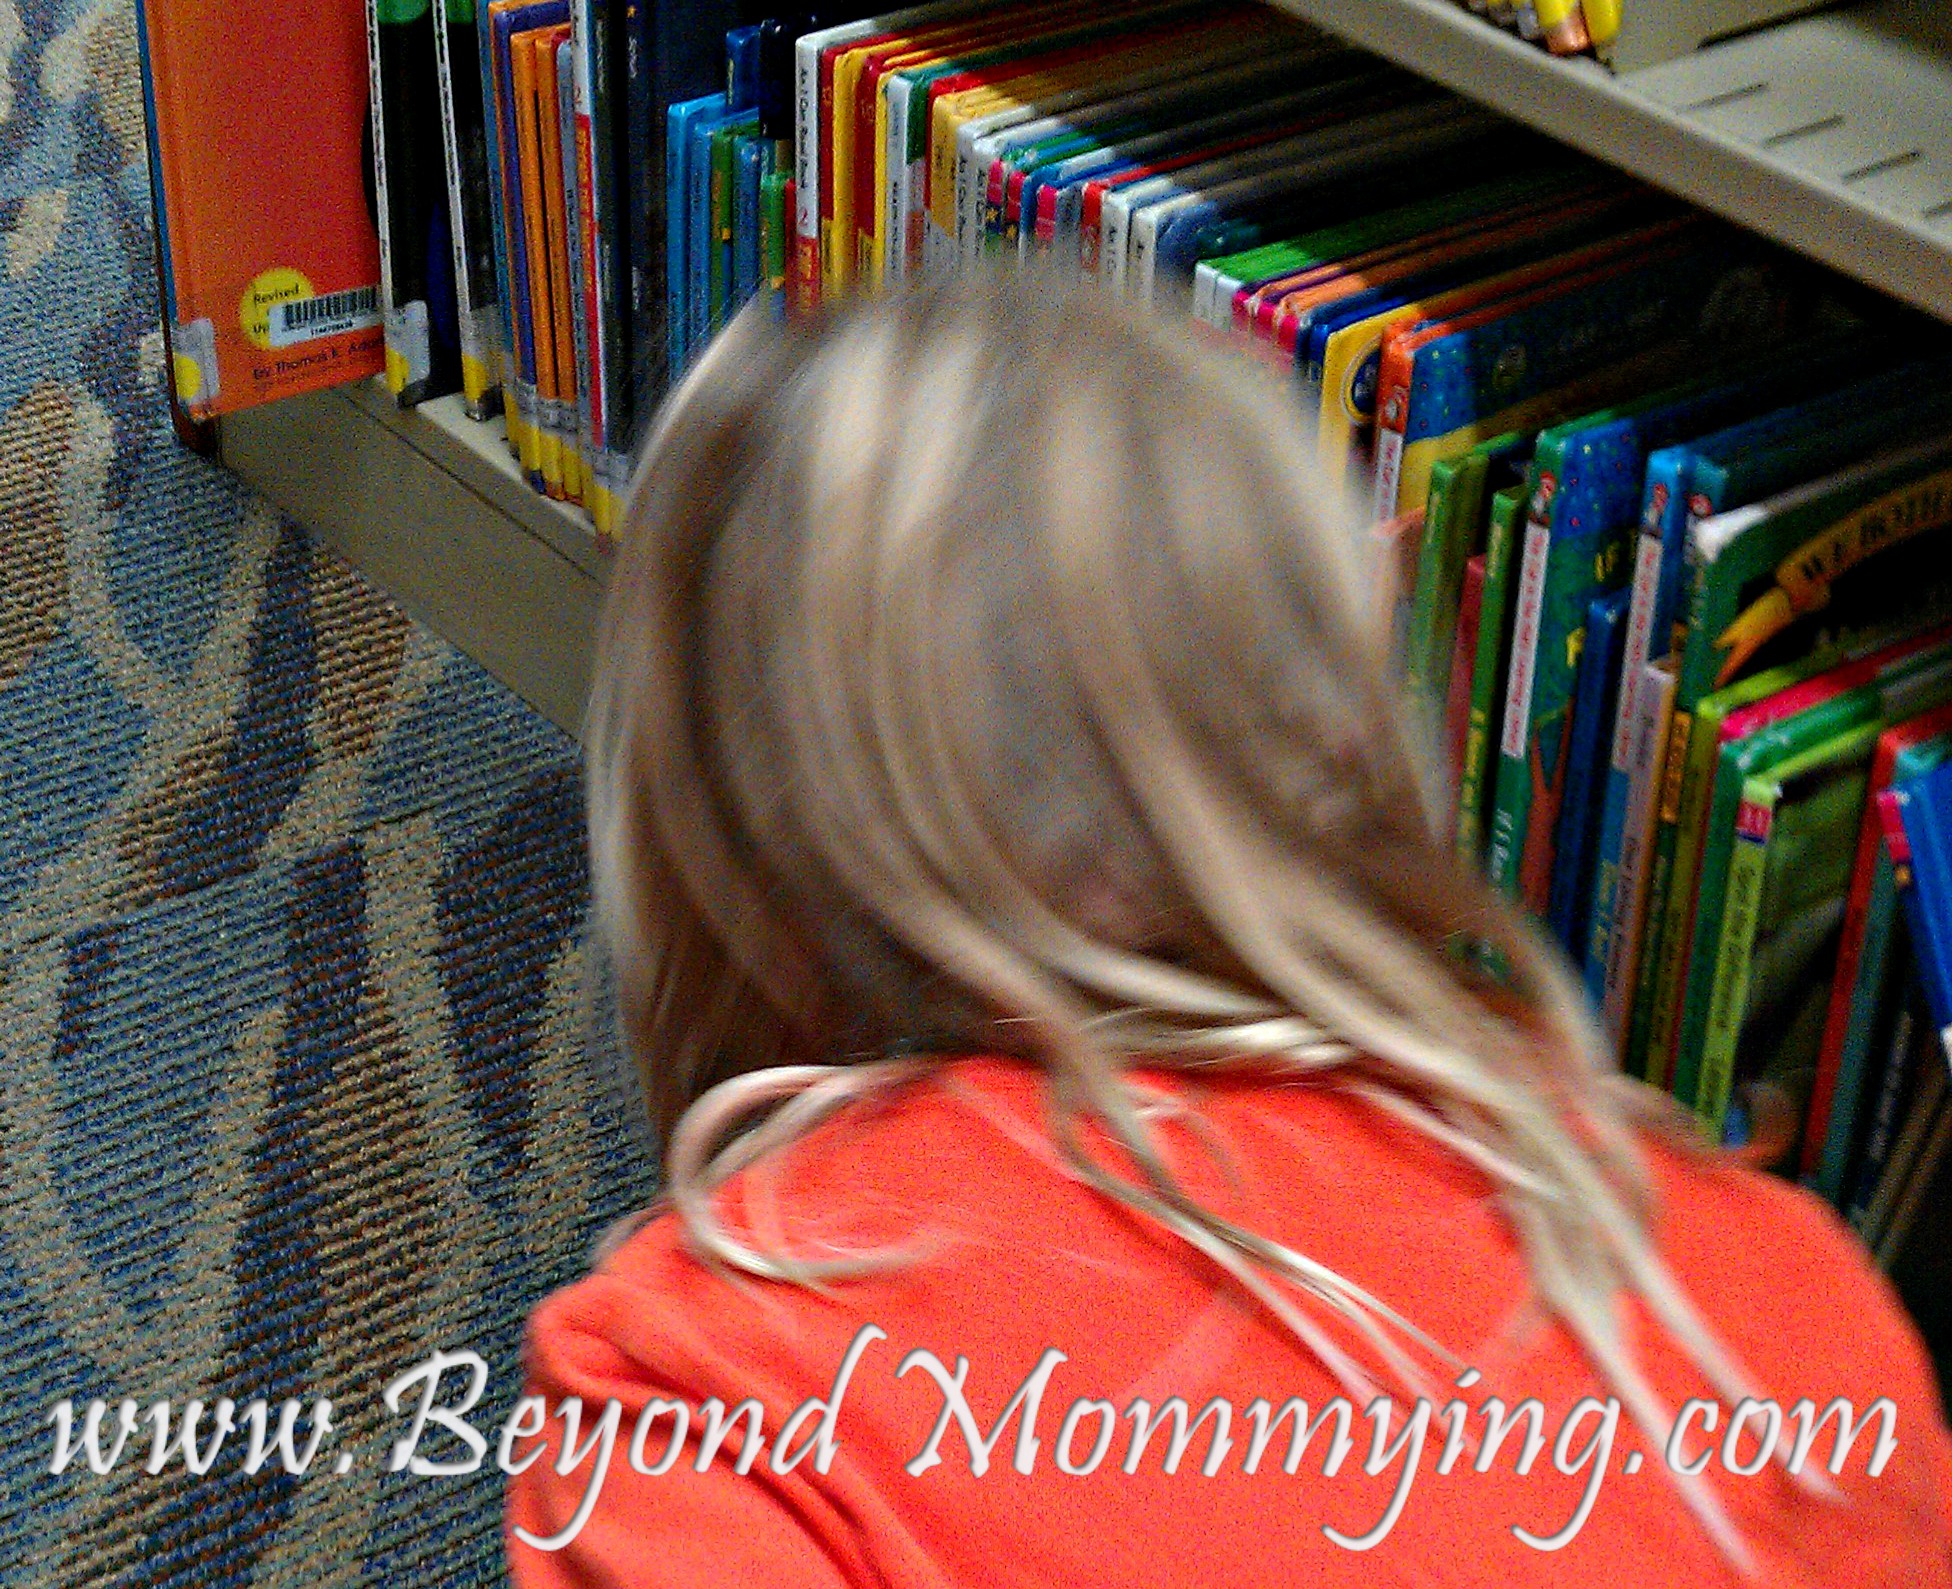 Tips for going to the library with kids